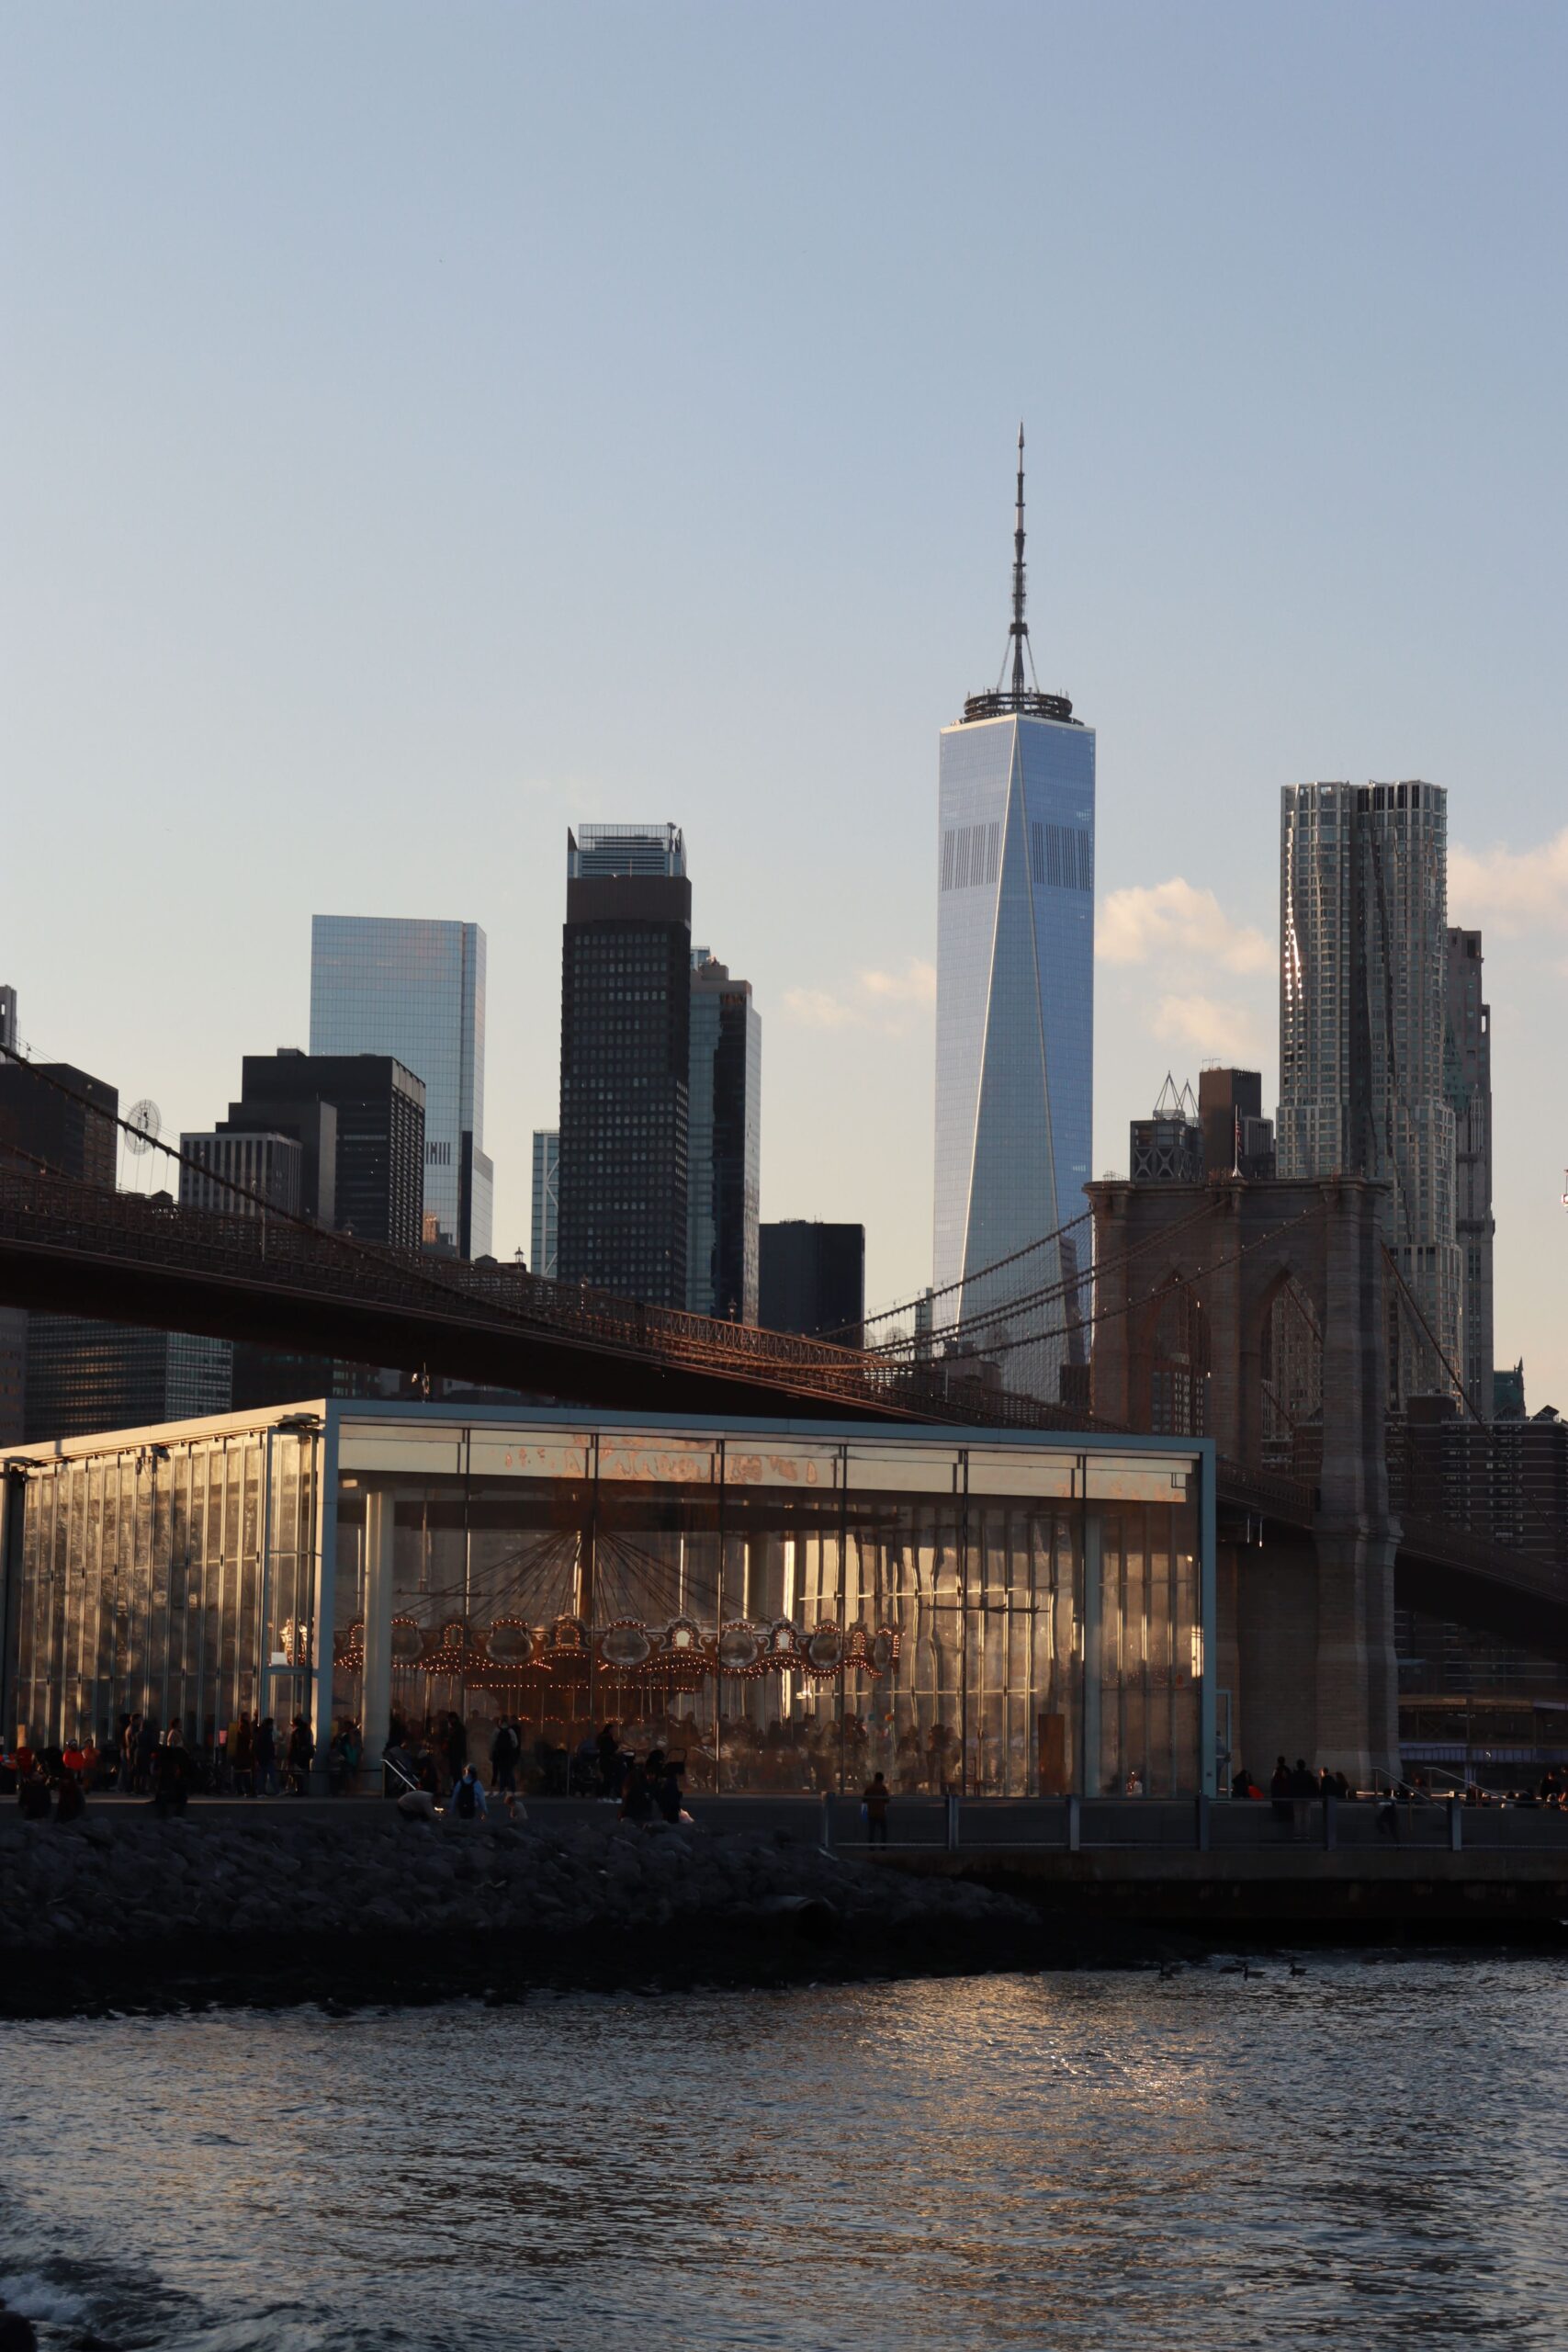 The view of the old carousel and the One World Trade Center Building from Dumbo Park, Brooklyn, New York.